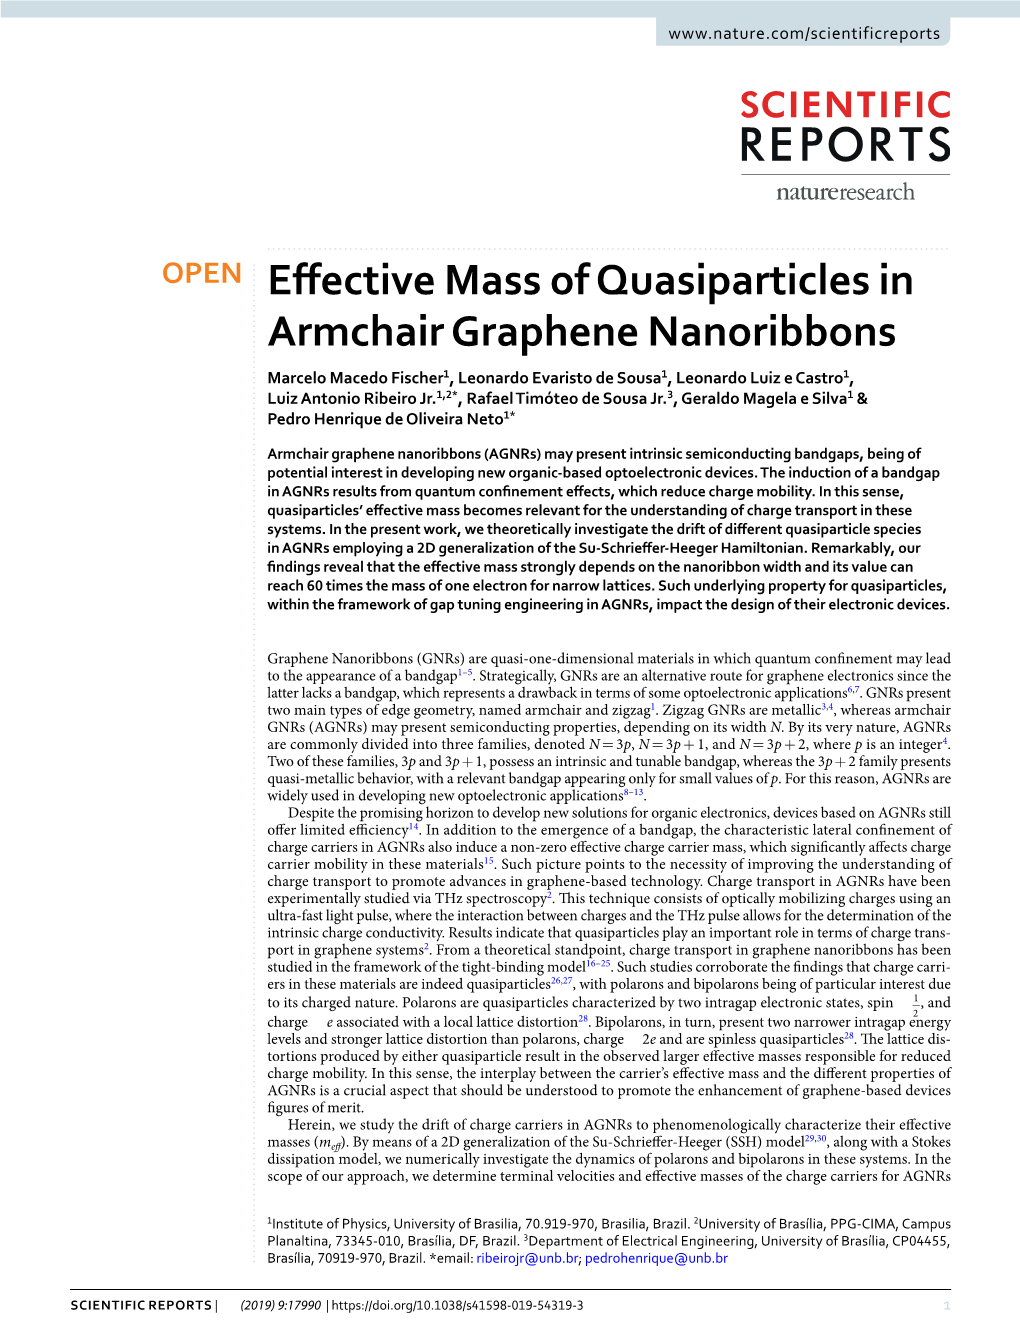 Effective Mass of Quasiparticles in Armchair Graphene Nanoribbons